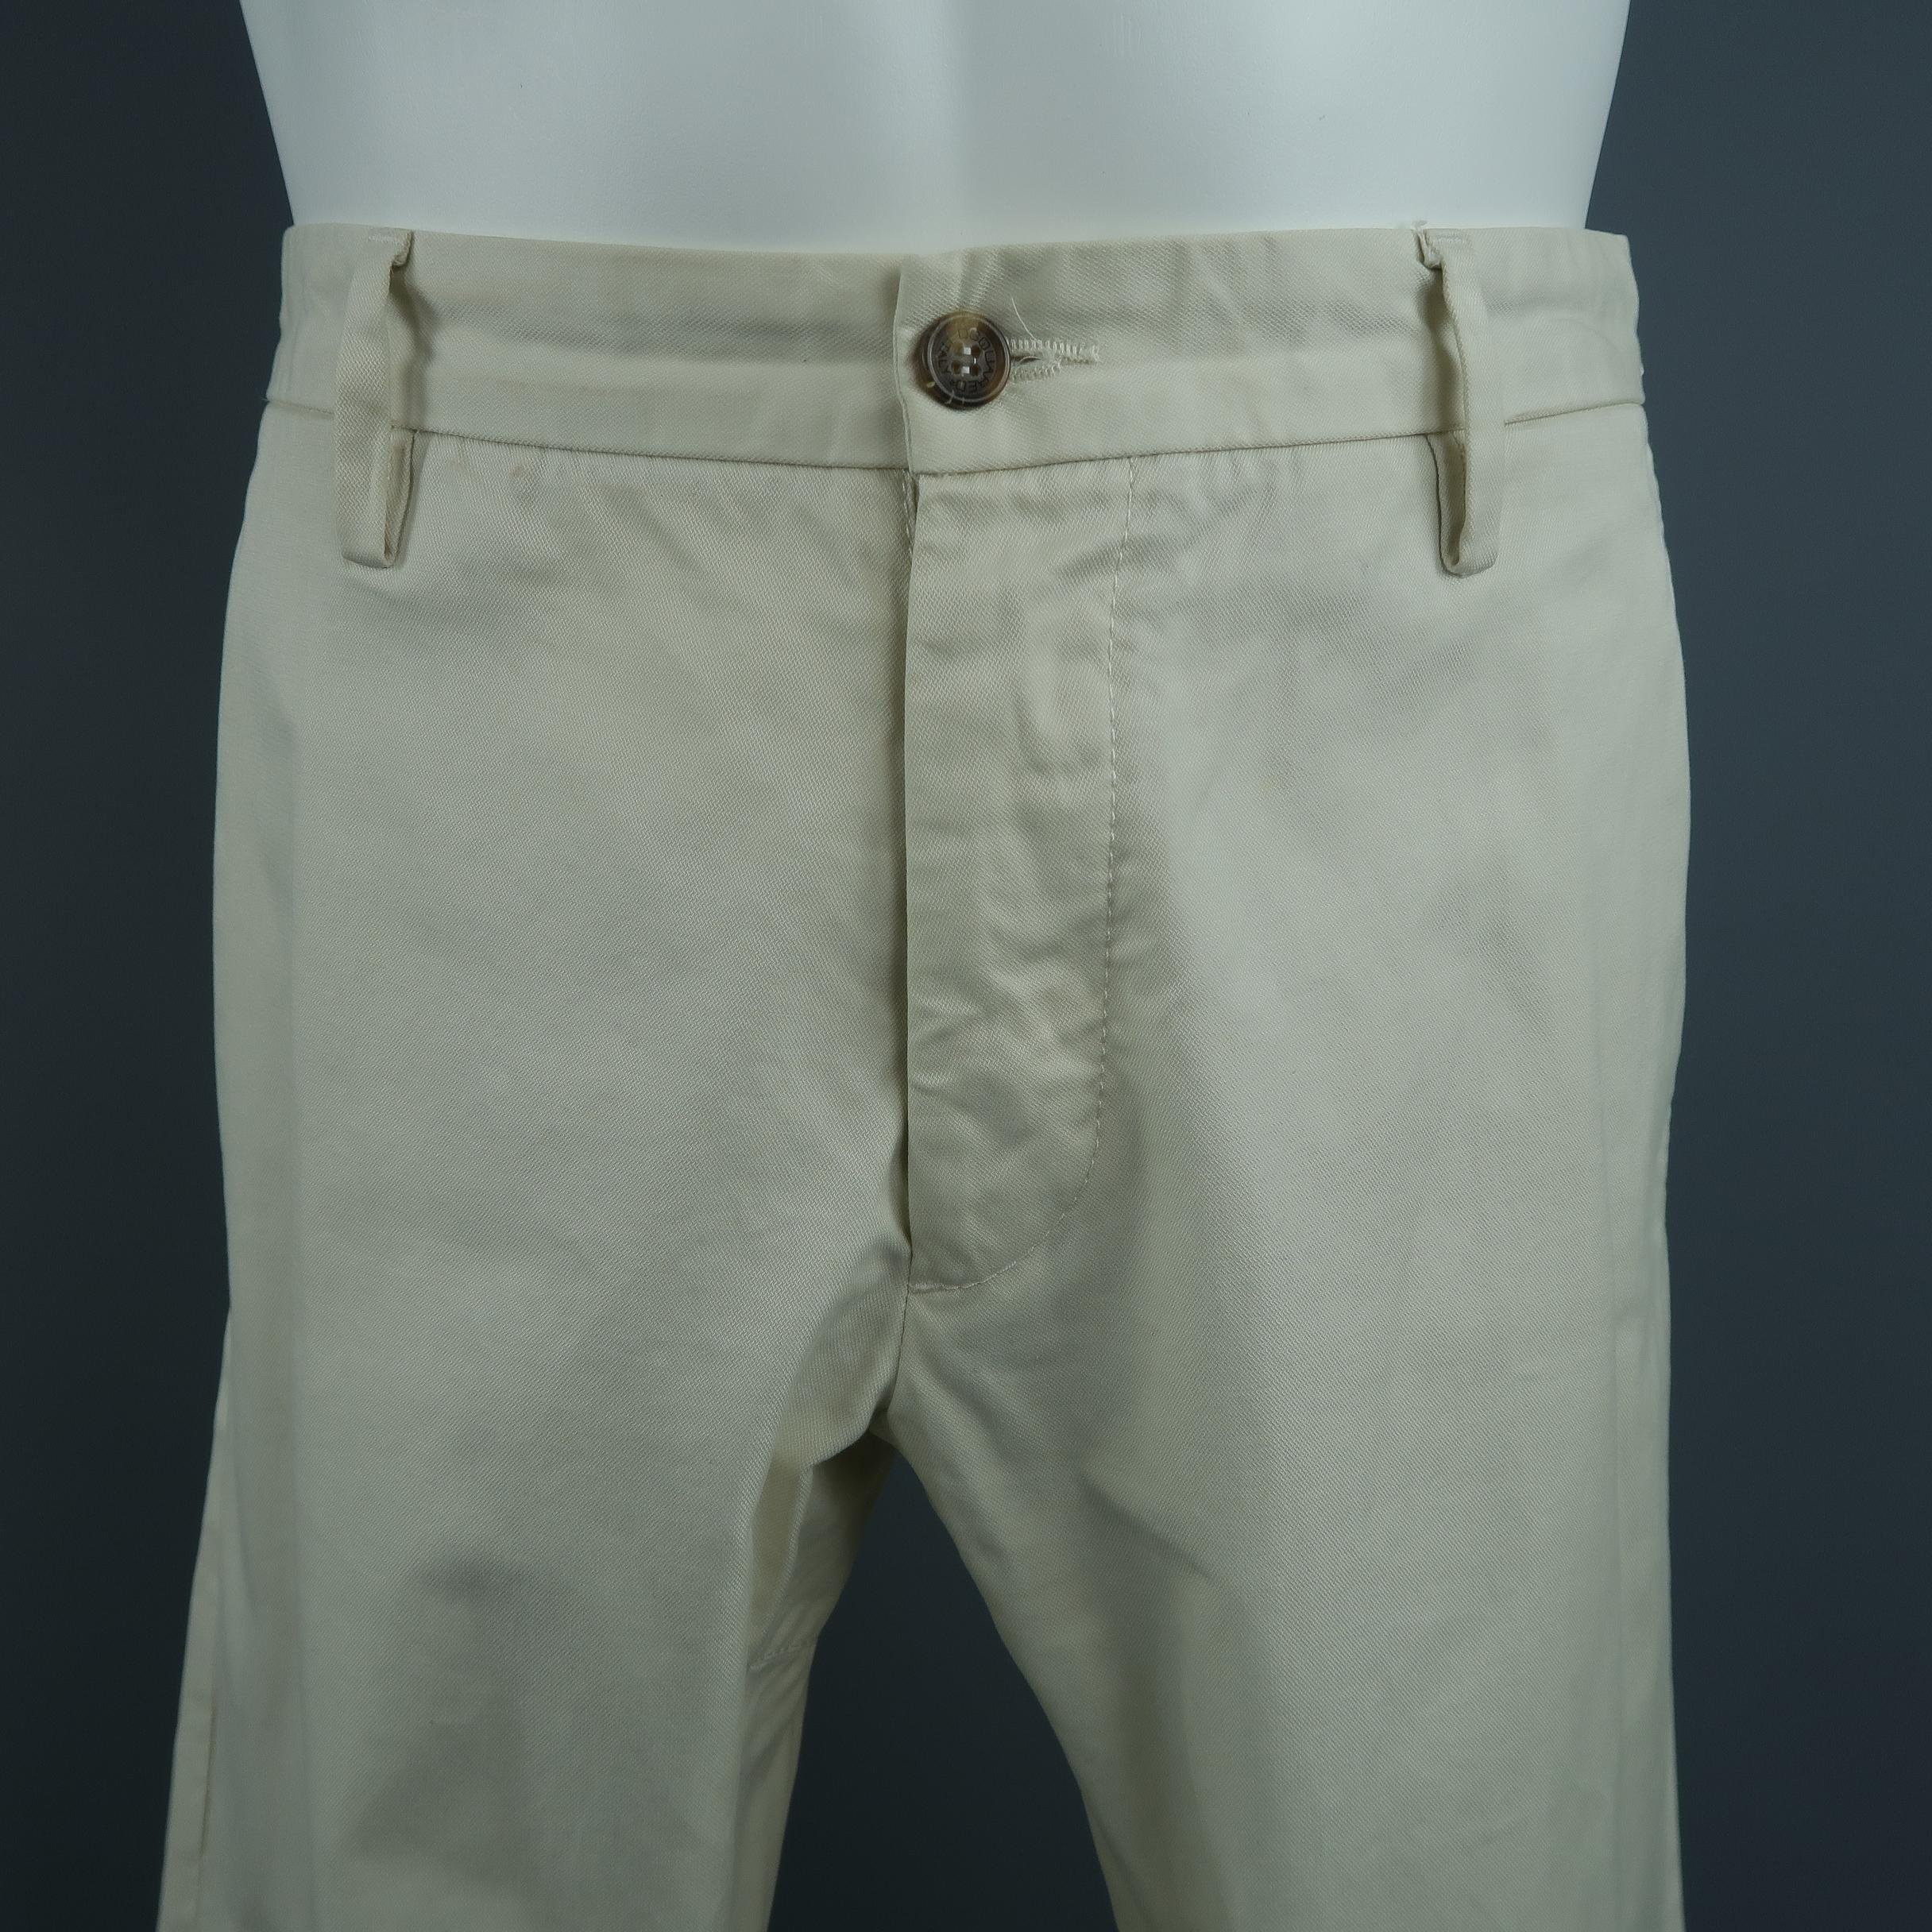 DSQUARED2 Casual pants, come in solid cream cotton with patch details on the back and side tabs. Made in Italy.
 
Fair Pre-Owned Condition, with small stains.
Marked: IT 48
 
Measurements:
 
Waist: 35 in.
Rise: 9 in.
Inseam:  31 in,